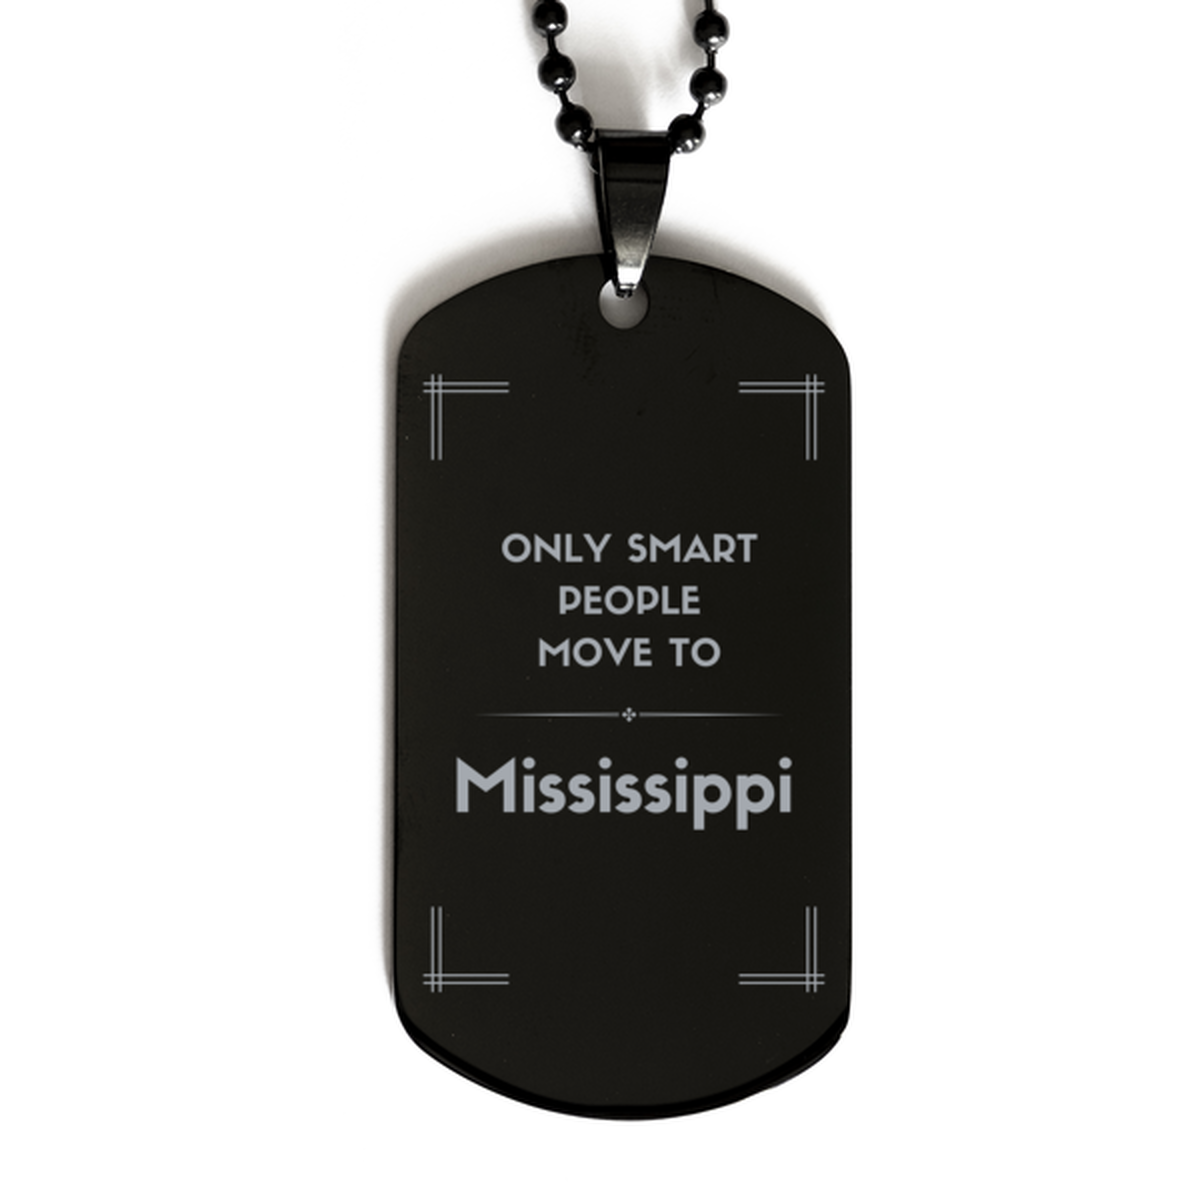 Only smart people move to Mississippi Black Dog Tag, Gag Gifts For Mississippi, Move to Mississippi Gifts for Friends Coworker Funny Saying Quote